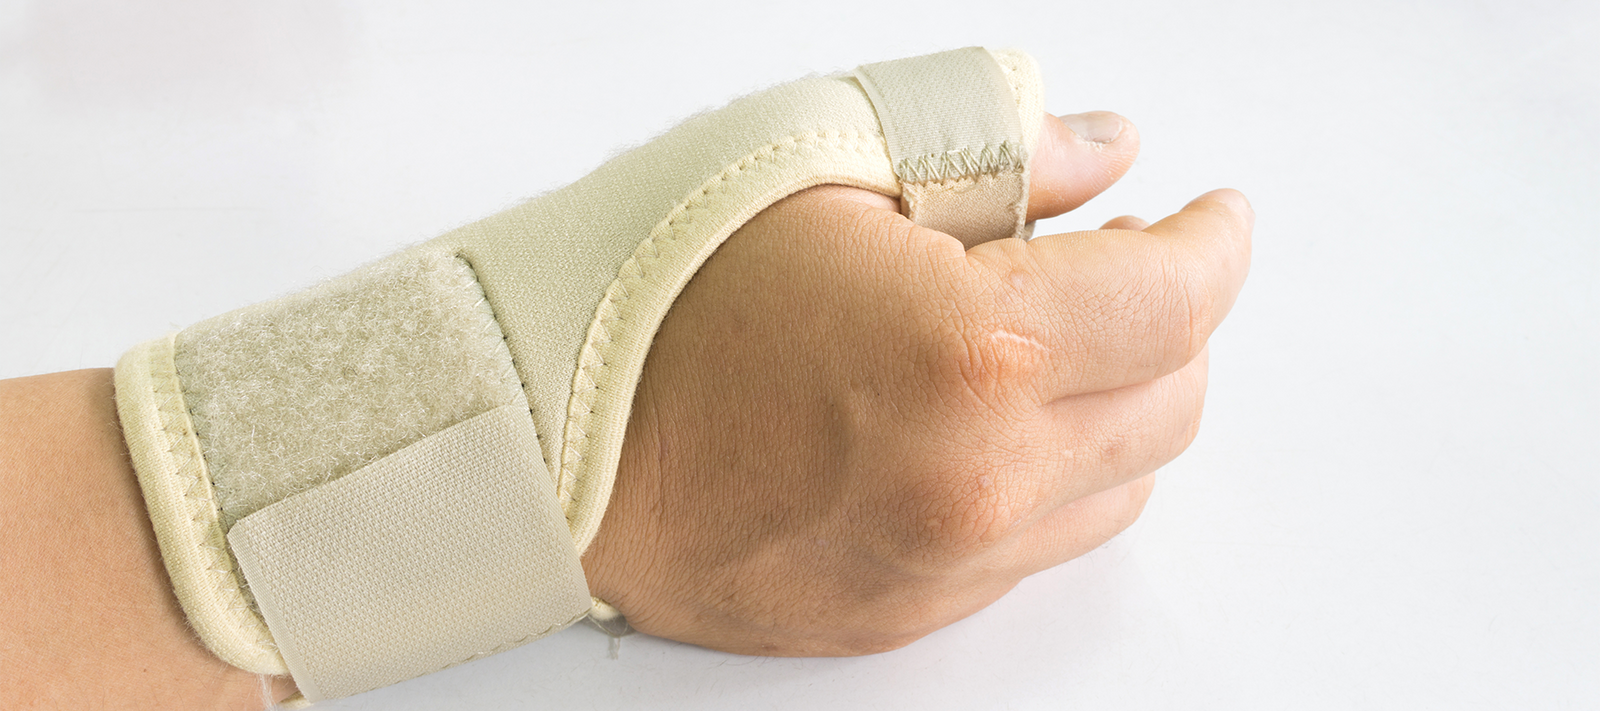 Workhard D-Ring Wrist and Thumb Spica Splint - Right - Medium - Complete  Care Shop